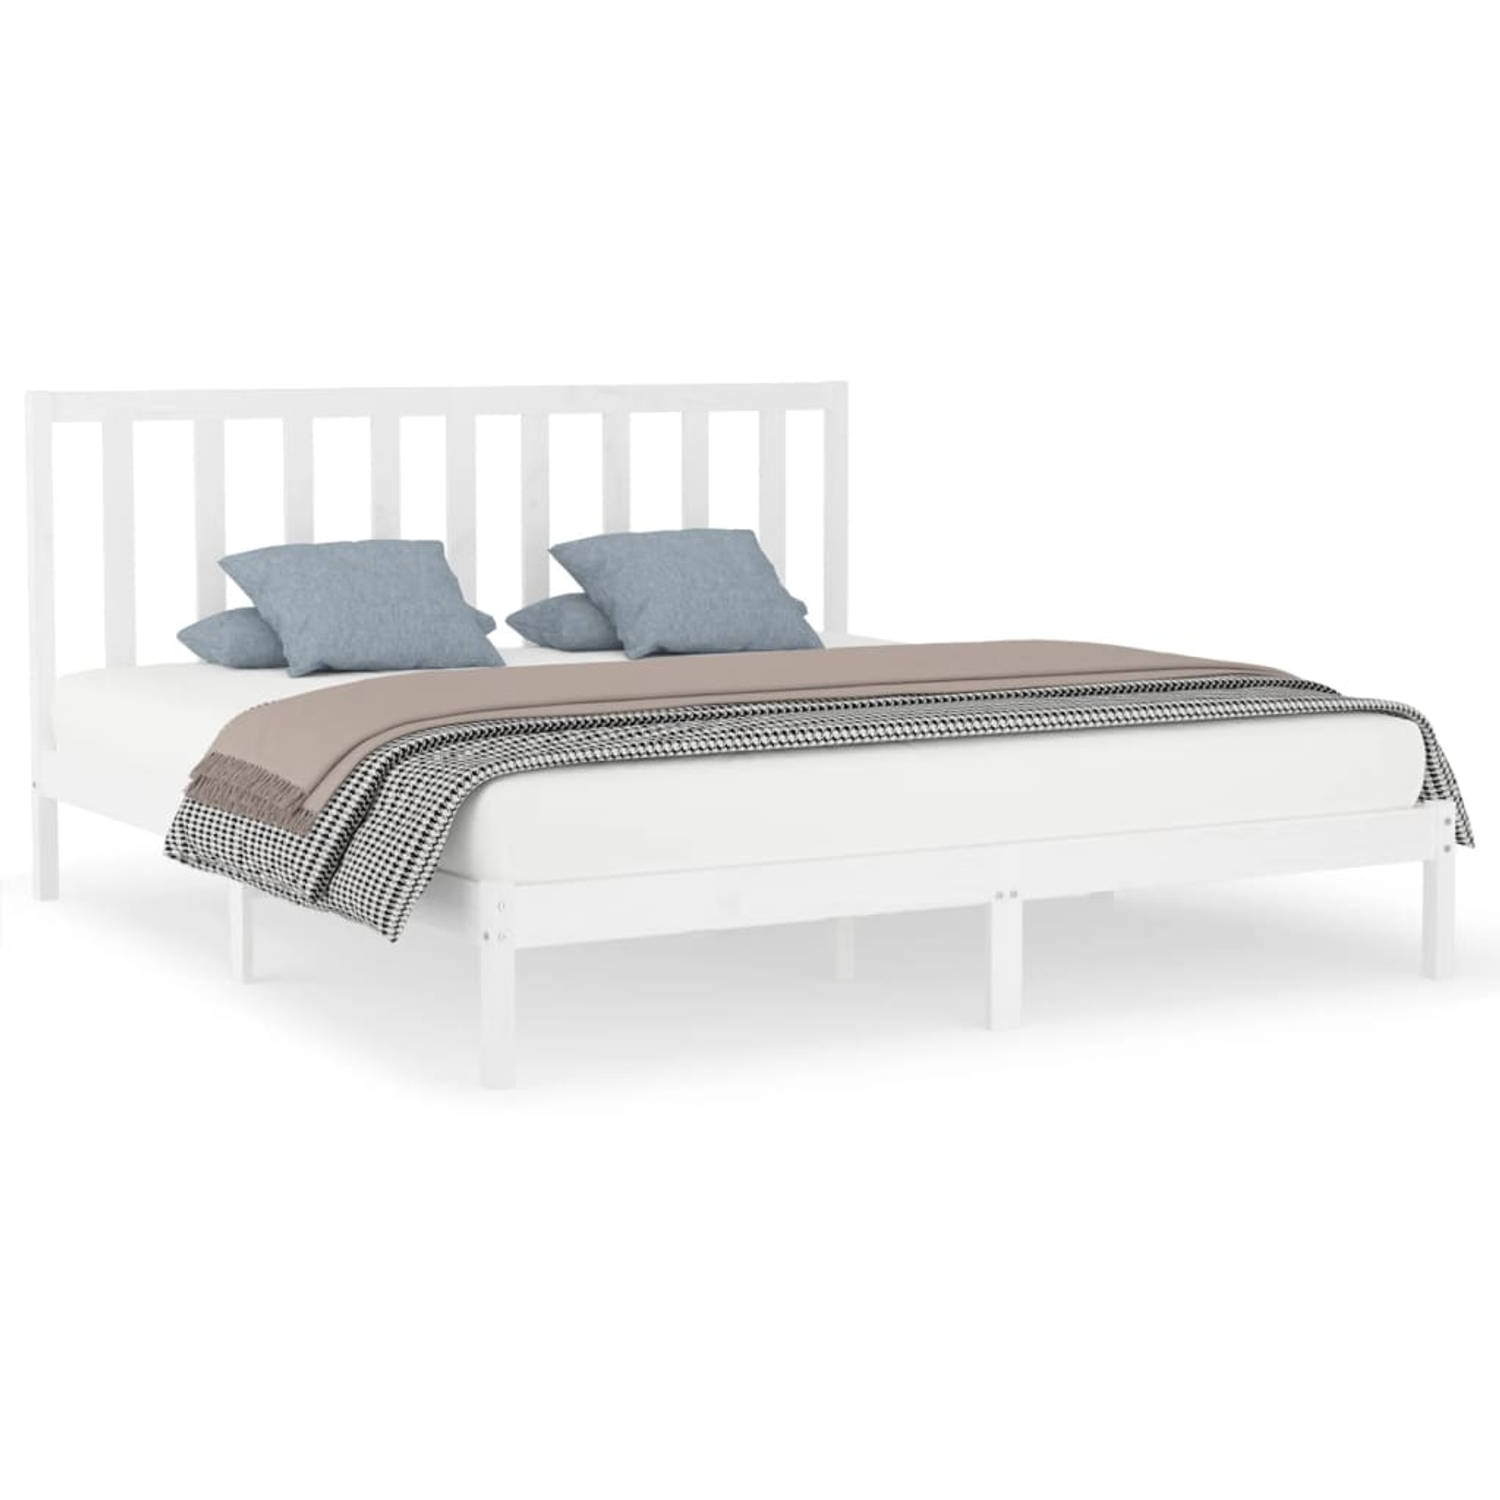 The Living Store Bedframe massief hout wit 200x200 cm - Bedframe - Bedframes - Tweepersoonsbed - Bed - Bedombouw - Dubbel Bed - Frame - Bed Frame - Ledikant - Bedframe Met Hoofdein